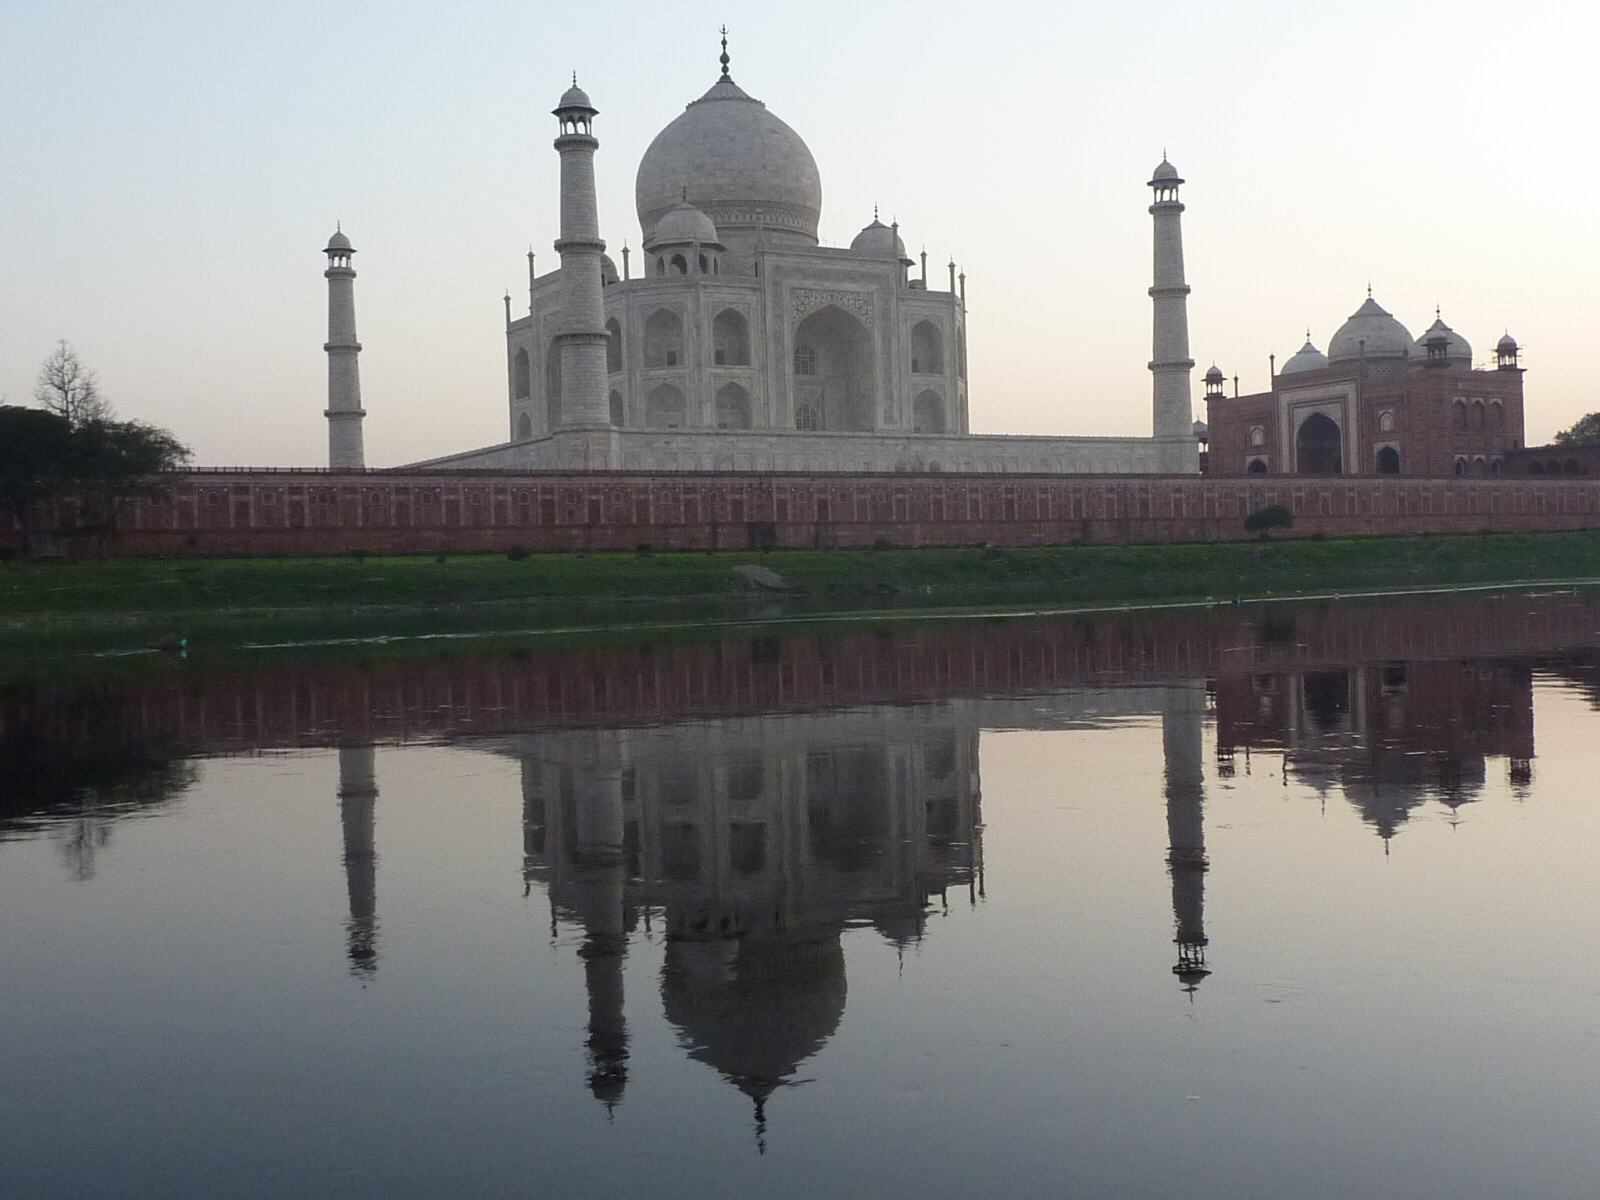 The Taj Mahal and its reflection in the river